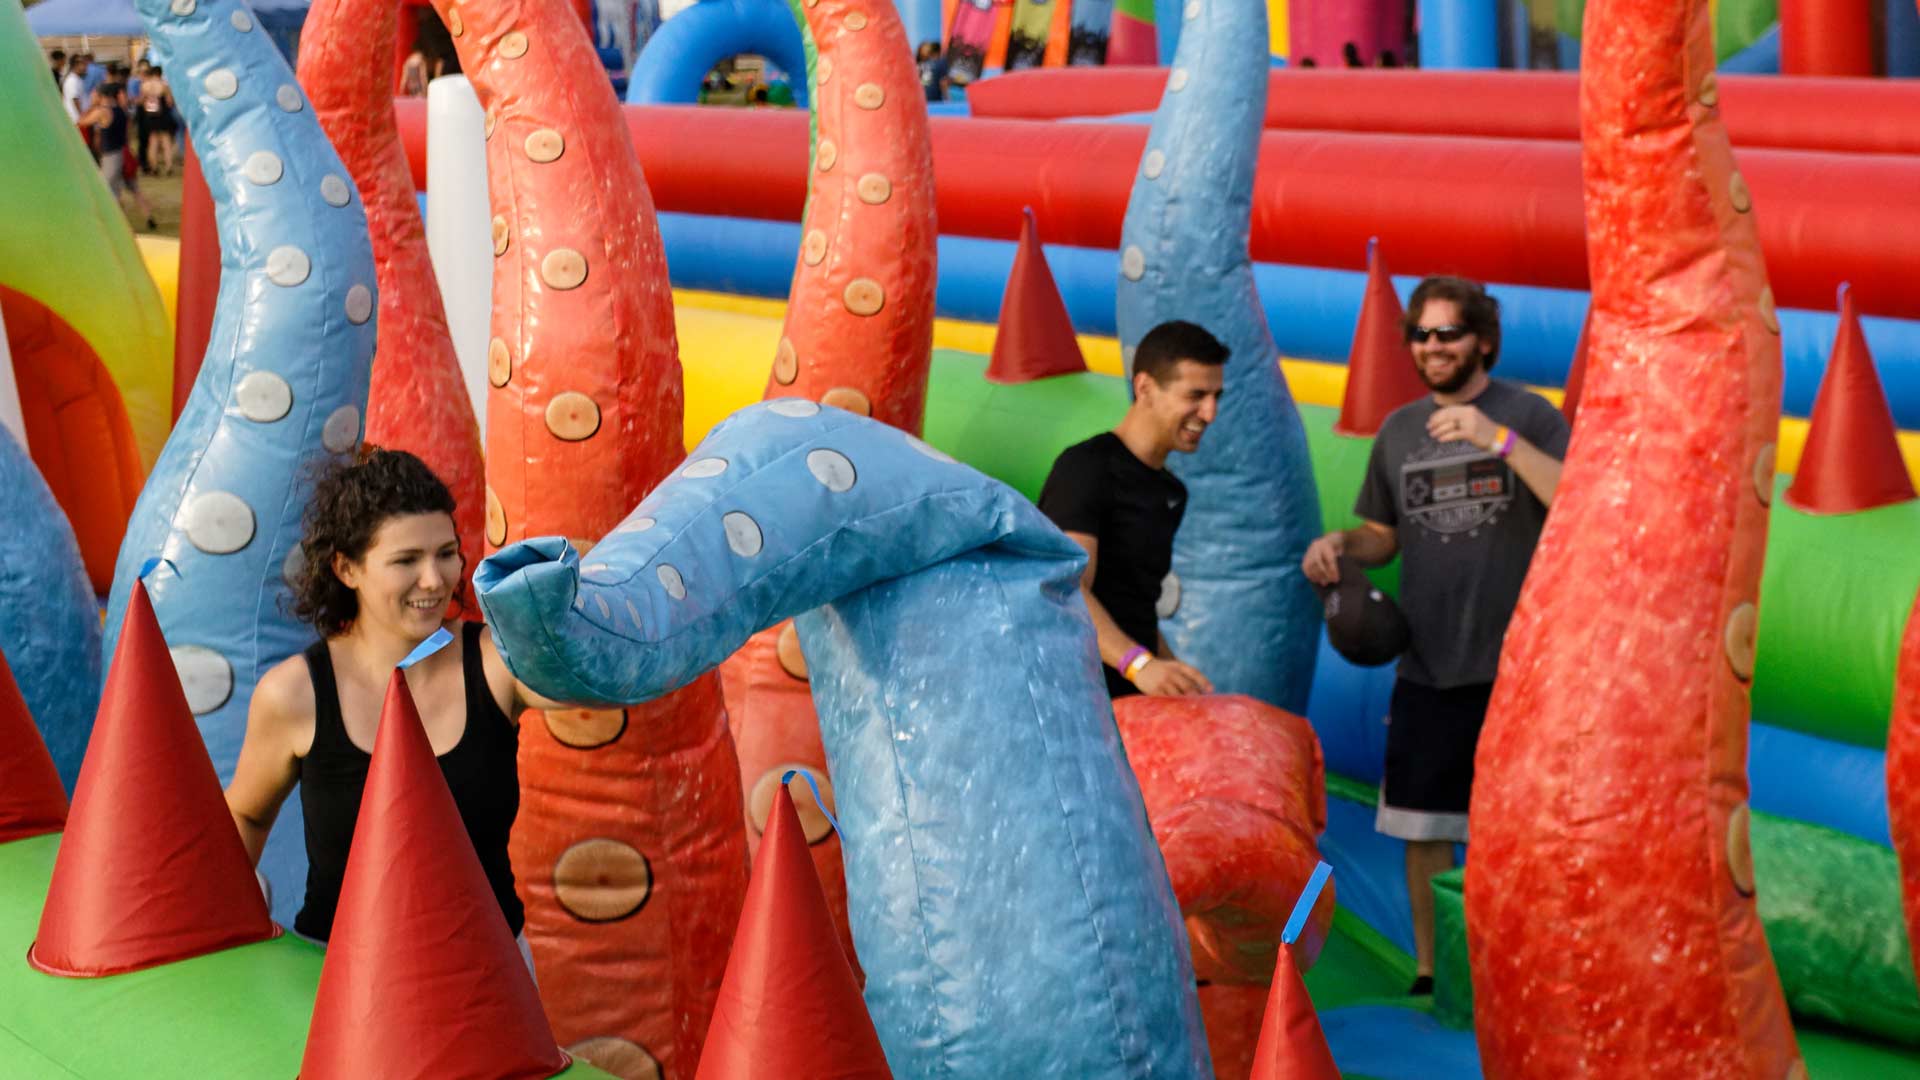 The World's Largest Inflatable Theme Park for Adults Is Coming to Australia